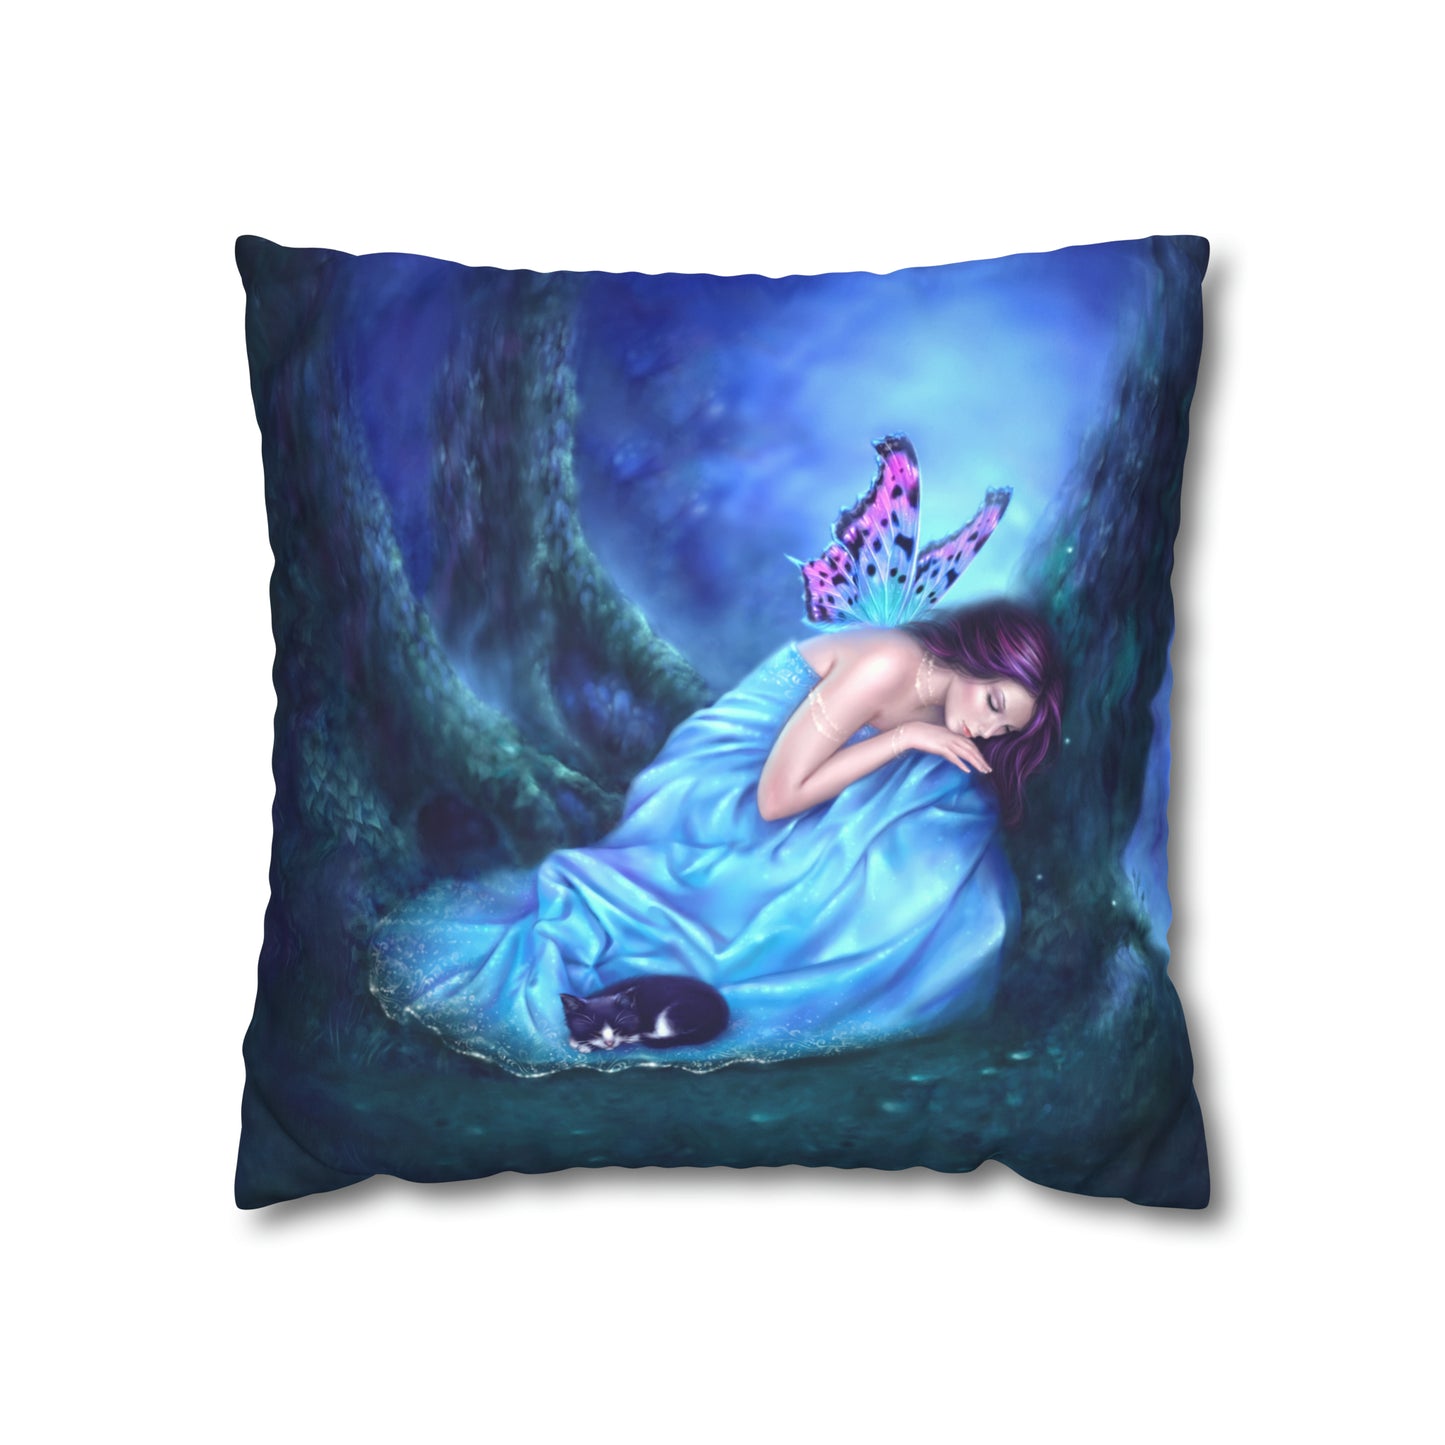 Throw Pillow Cover - Serenity